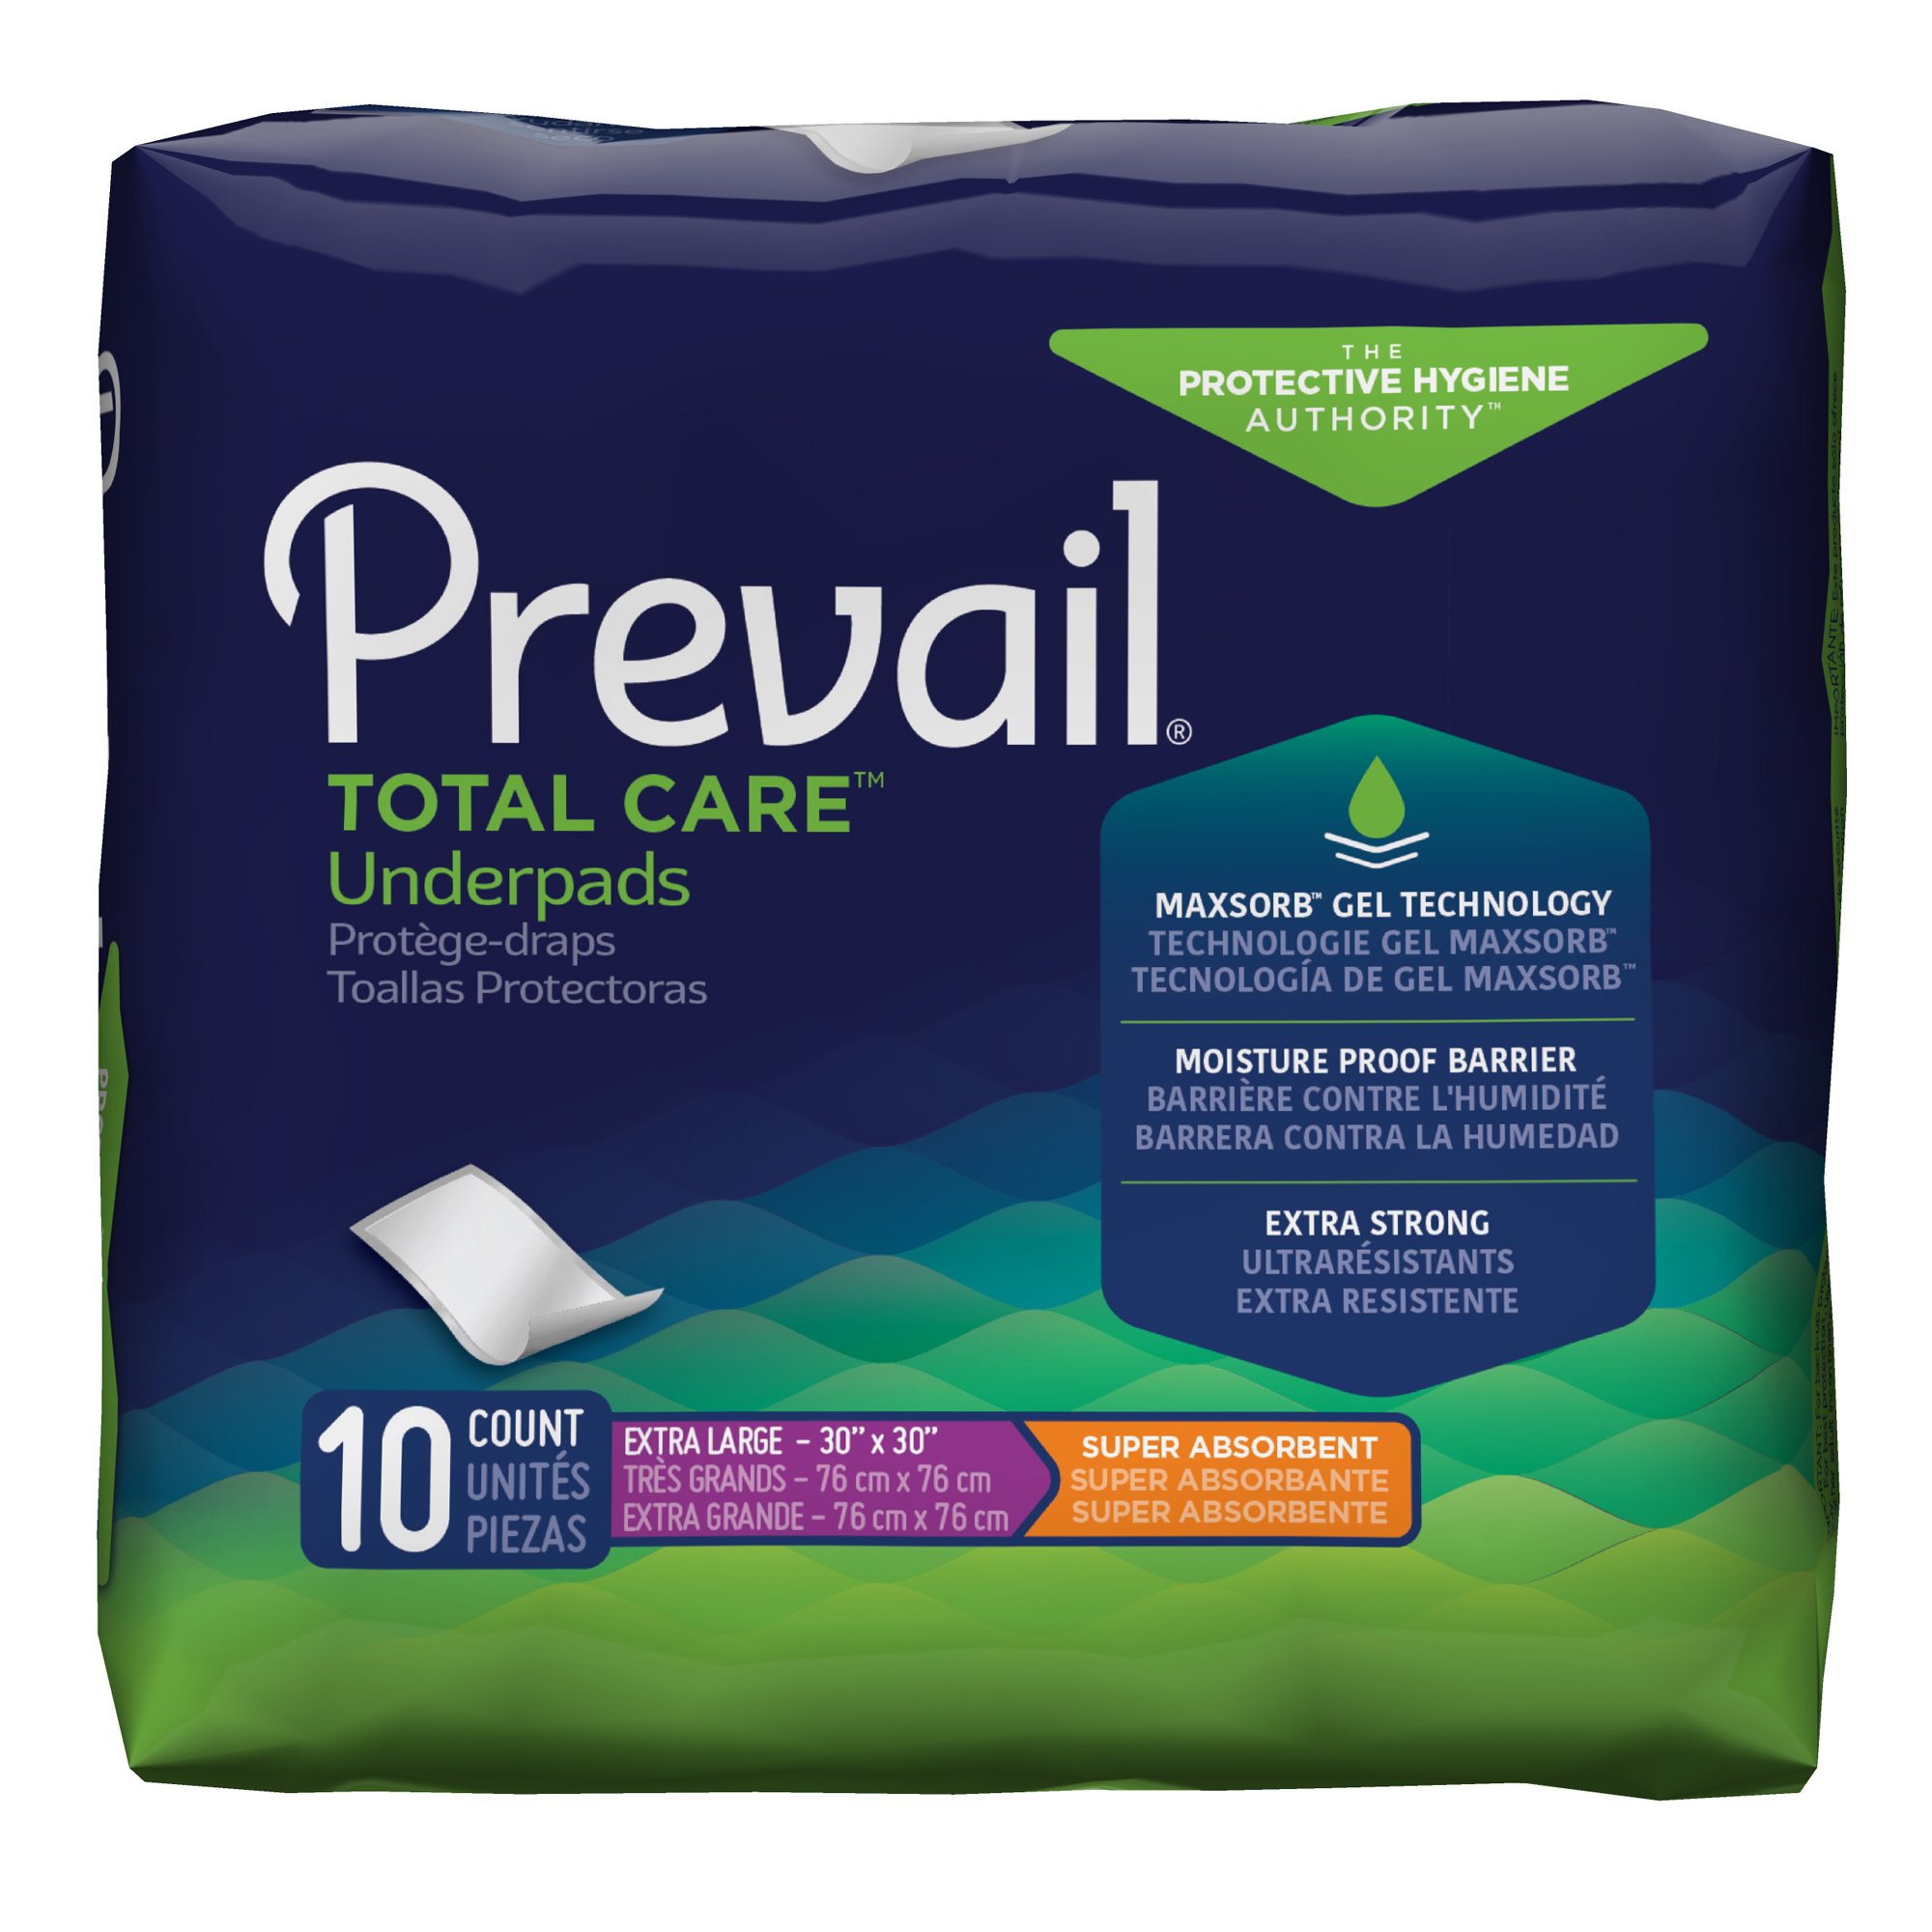 Prevail Total Care Super Absorbent Polymer Underpad, 30 x 30 Inch